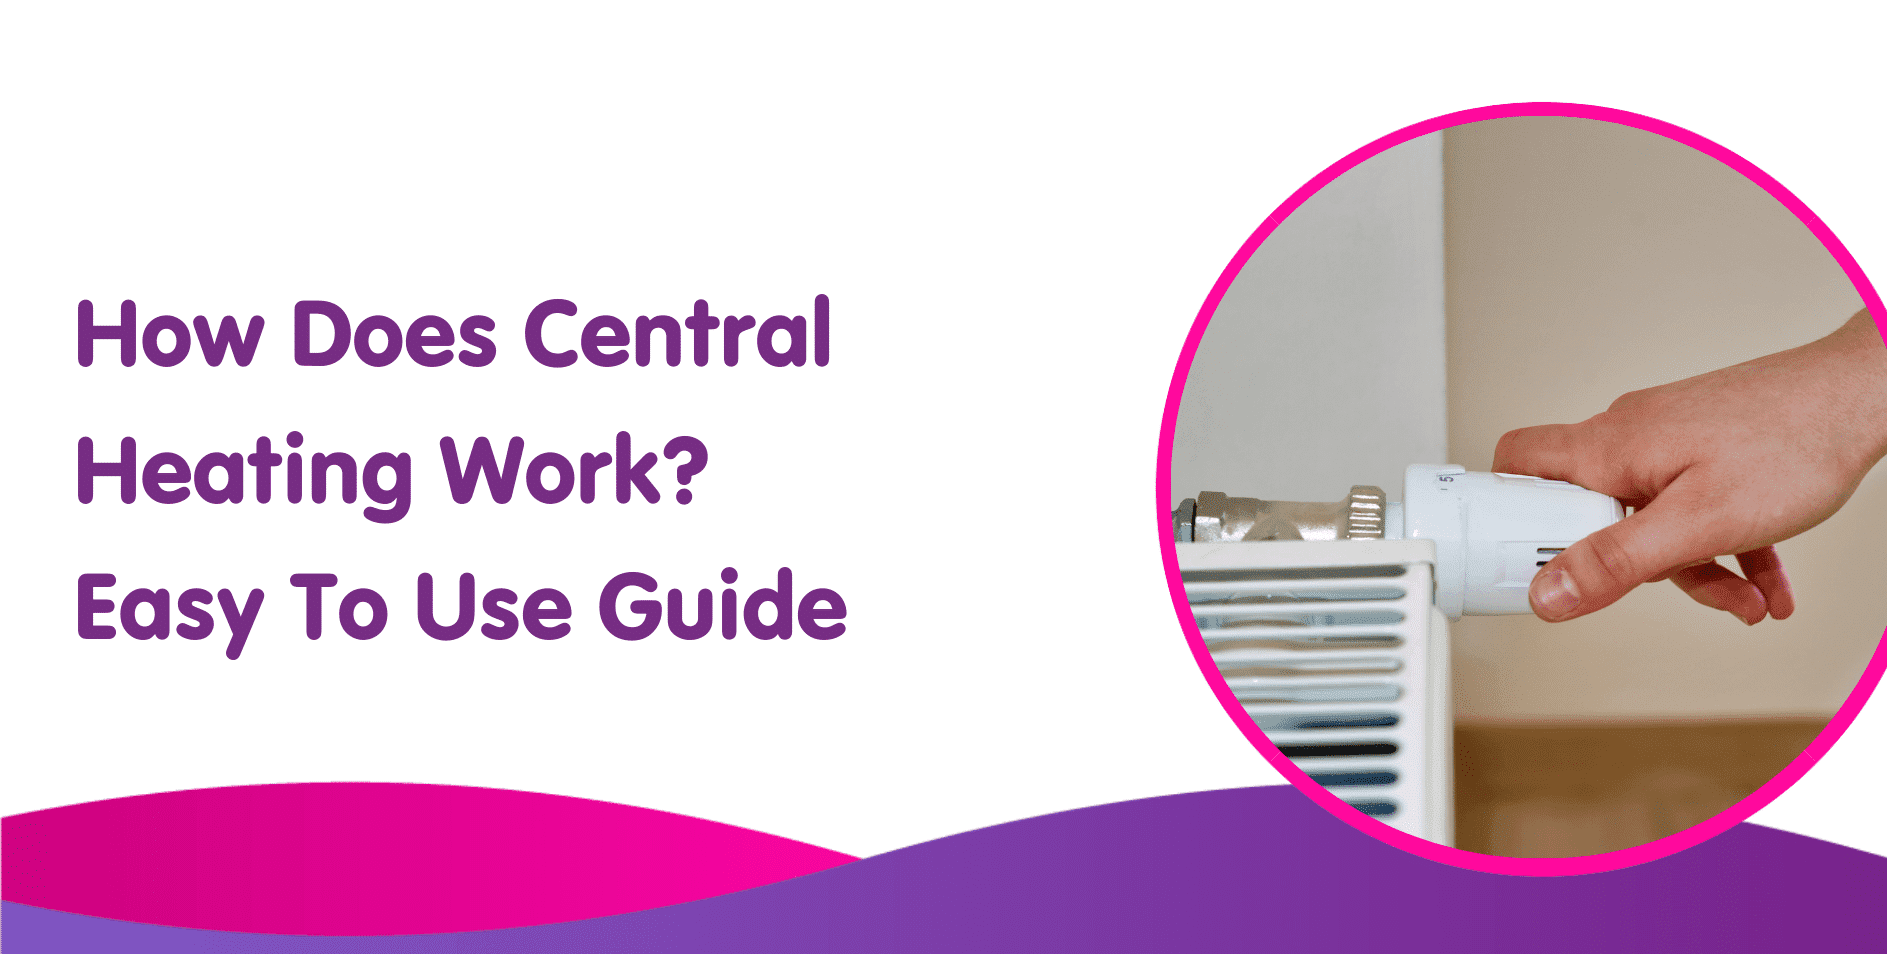 How Does Central Heating Work? Easy To Use Guide